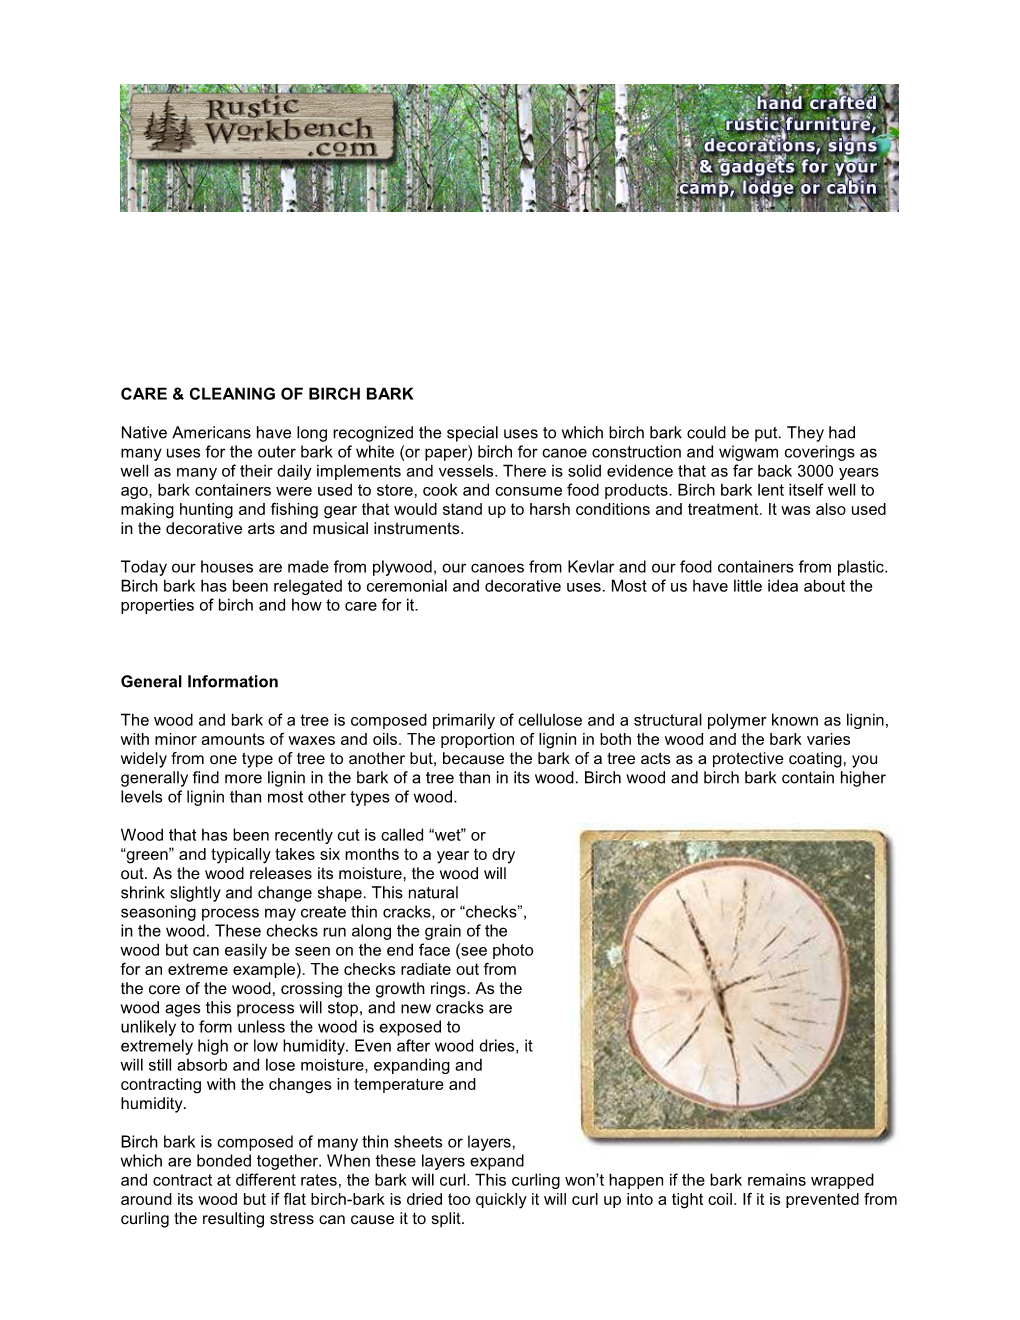 Care and Cleaning of Birch Bark